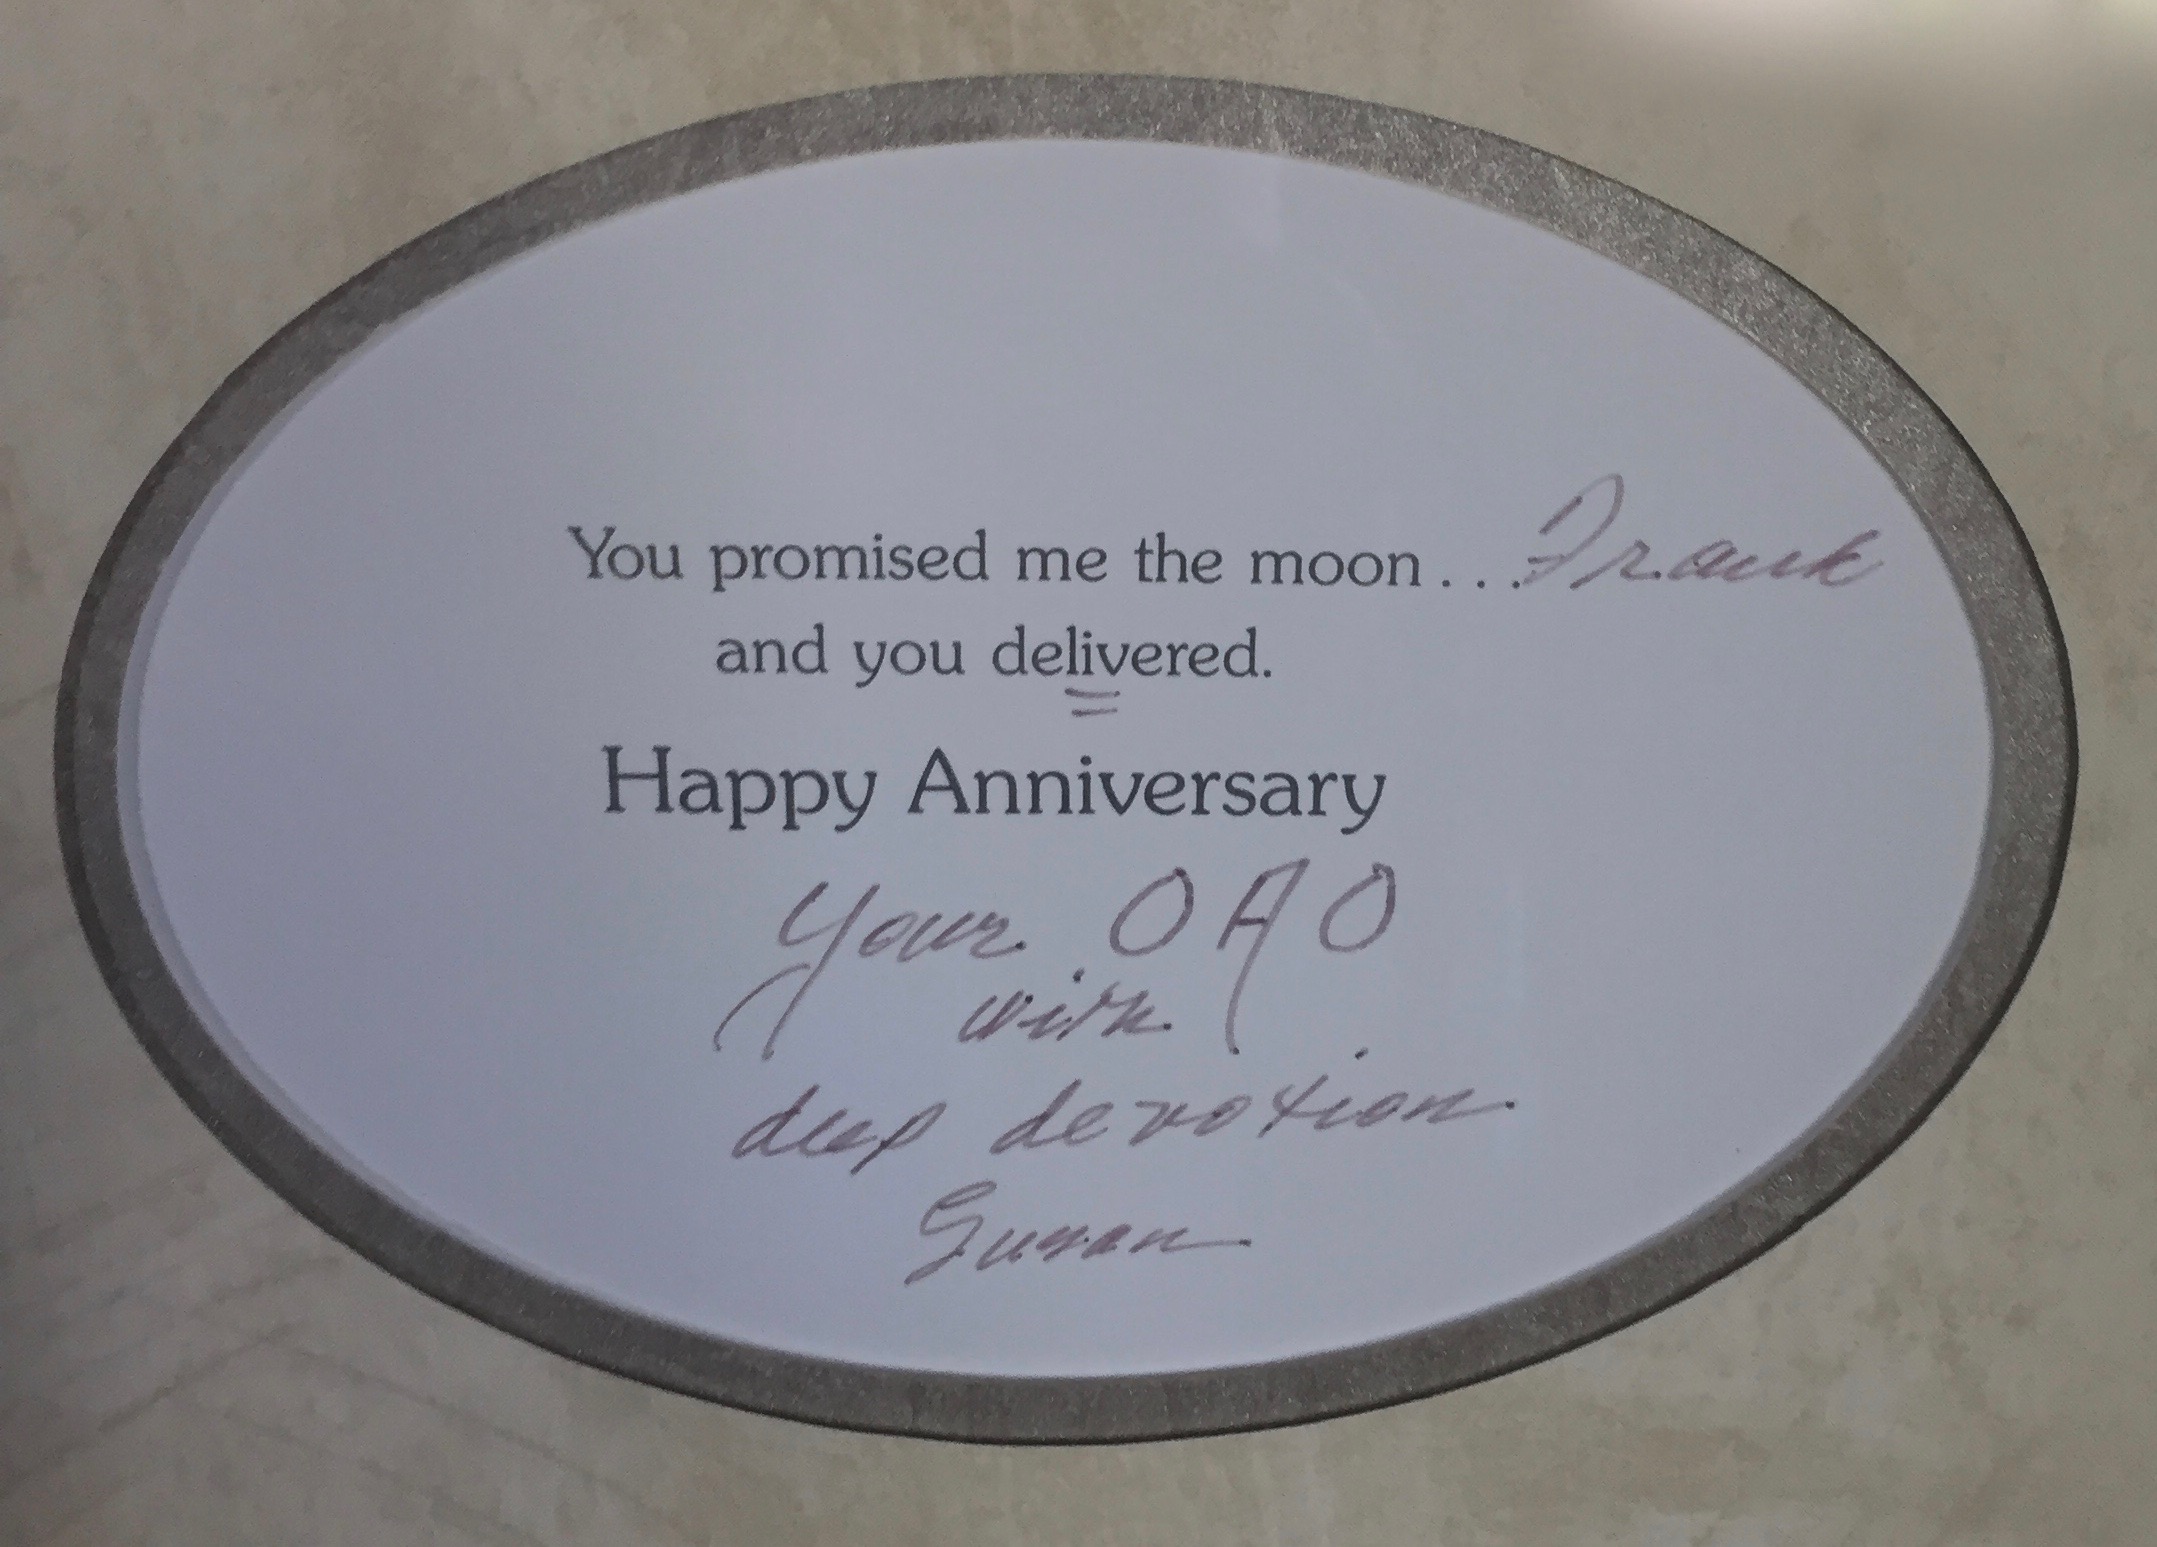 Frank's cherished anniversary card from Susan that hangs in their home